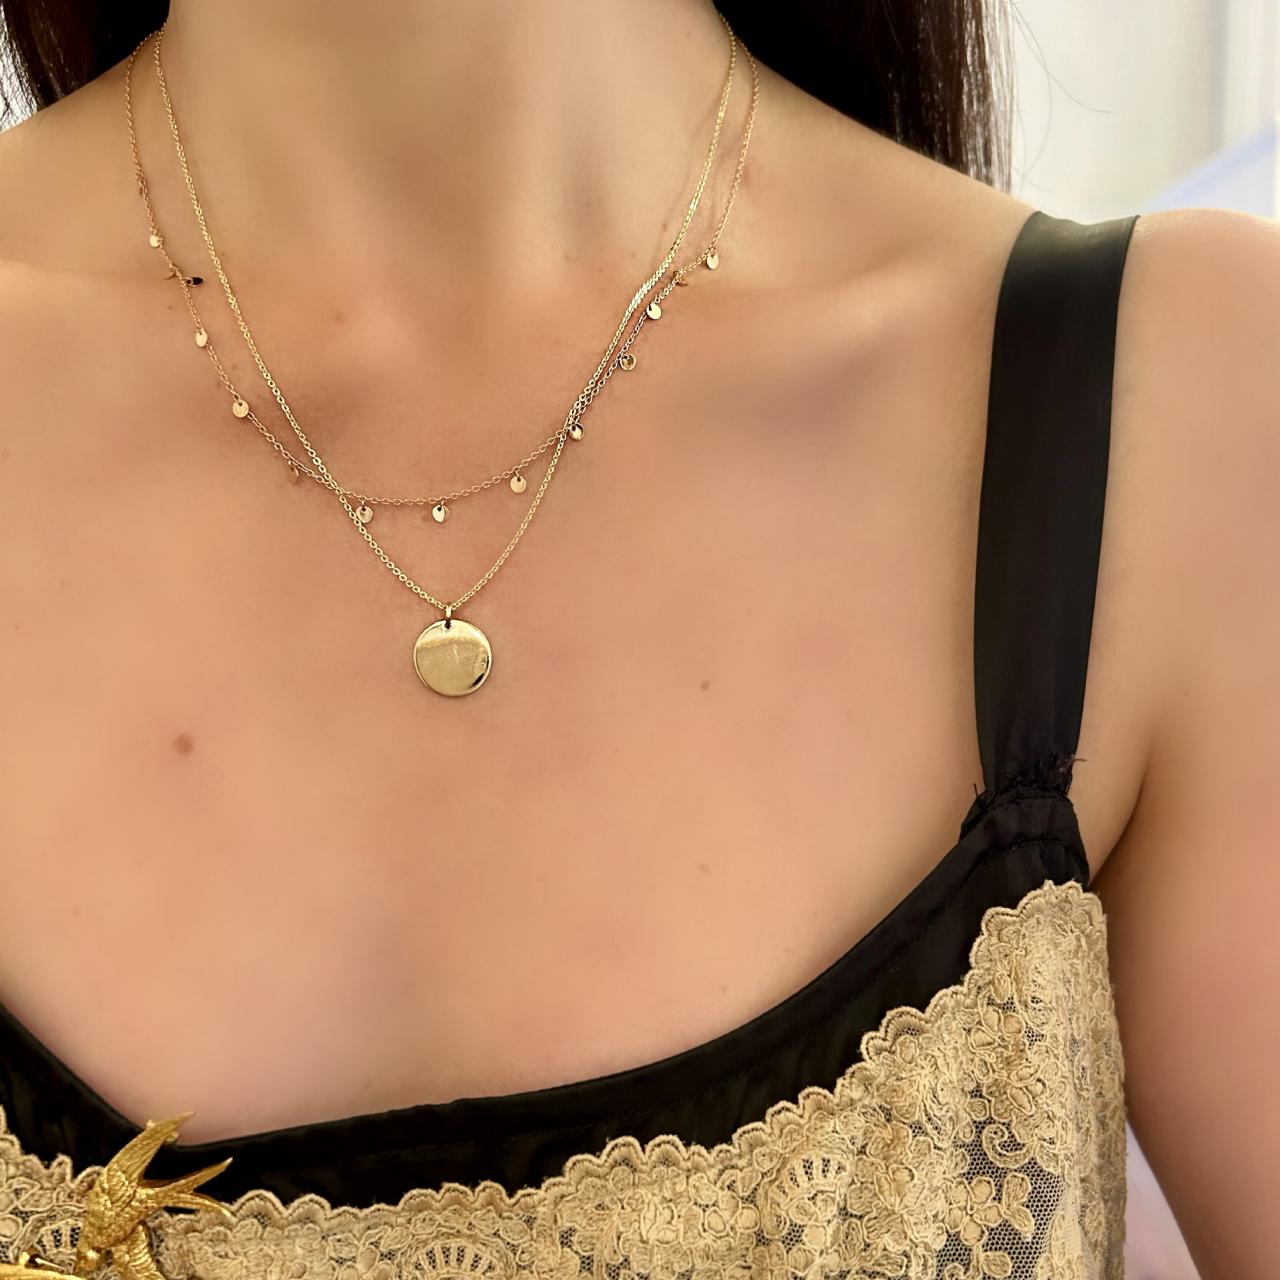 LD droplet necklace in Yellow